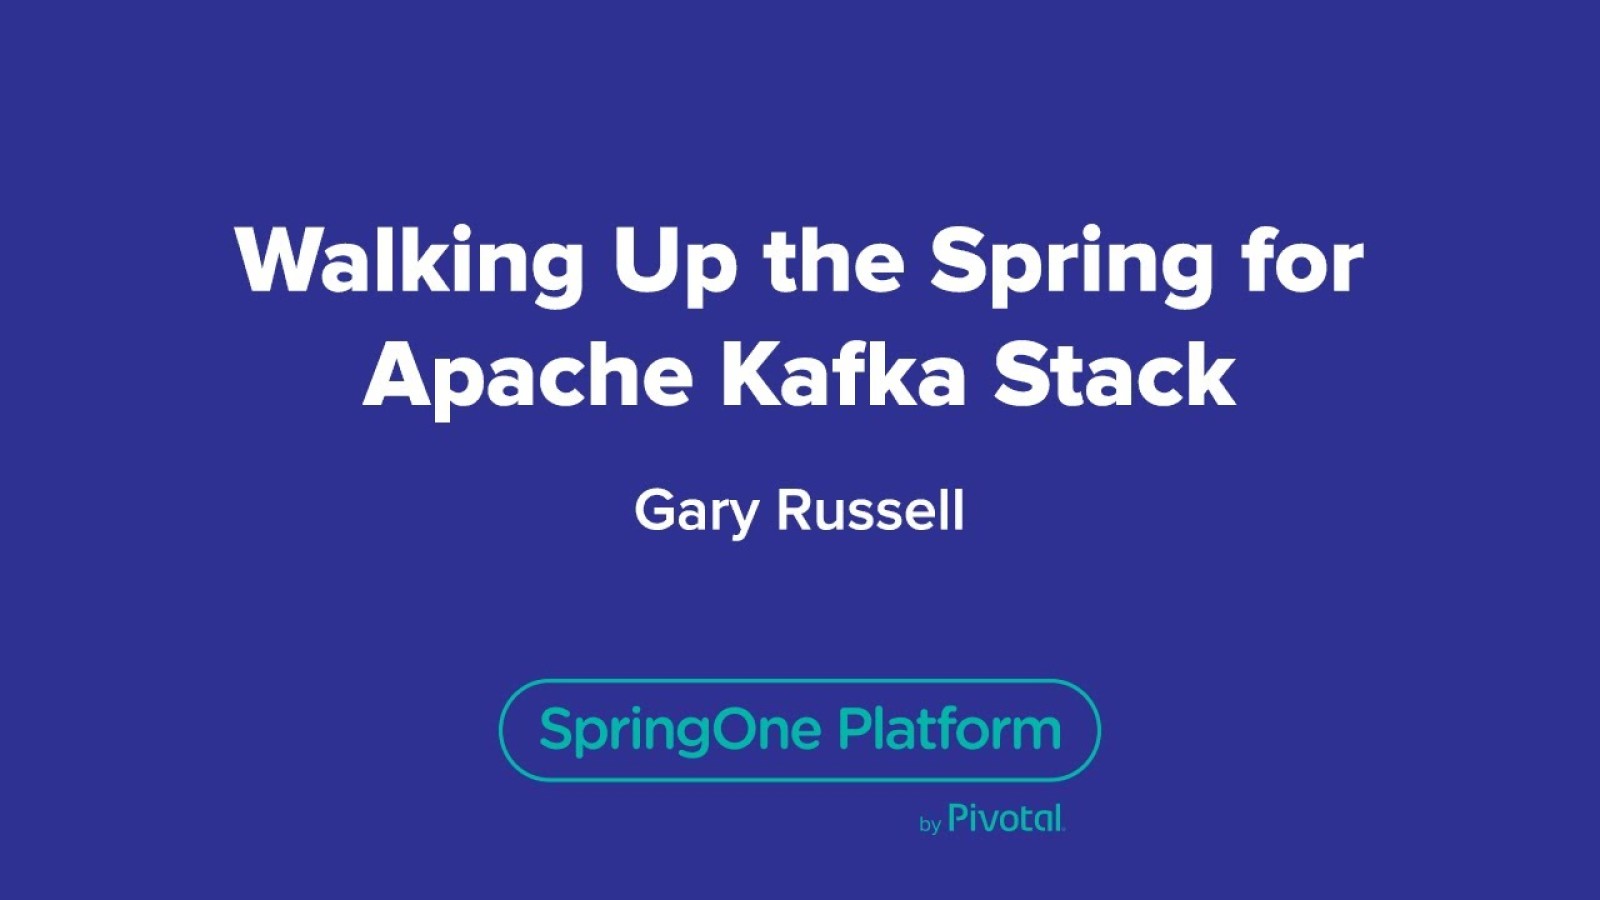 Walking up the Spring for Apache Kafka Stack